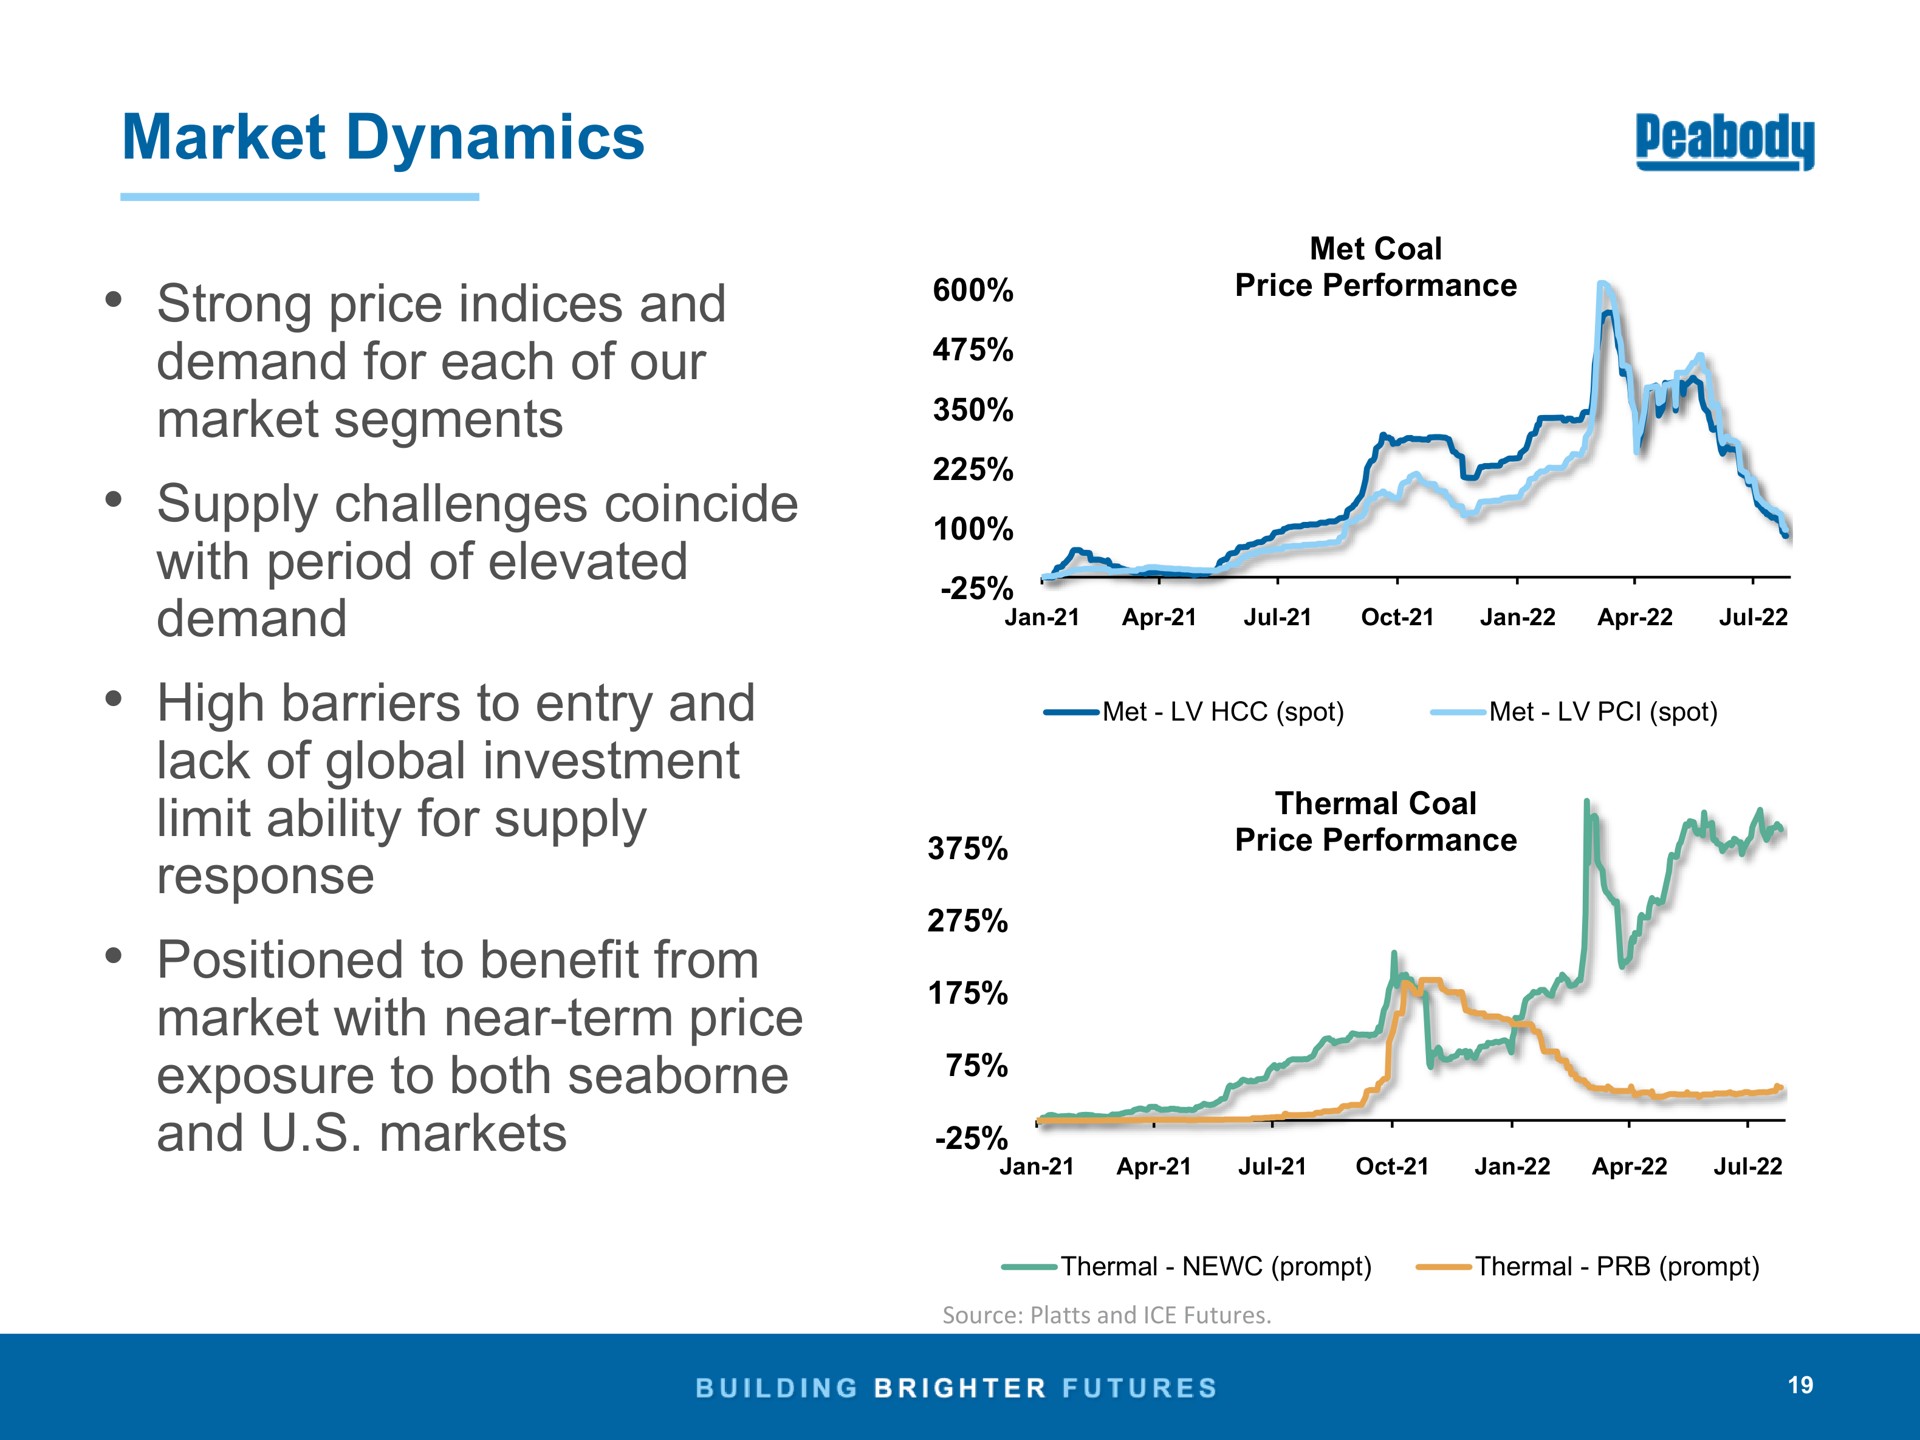 market dynamics strong price indices and demand for each of our market segments supply challenges coincide with period of elevated demand high barriers to entry and lack of global investment limit ability for supply response positioned to benefit from market with near term price exposure to both and markets | Peabody Energy